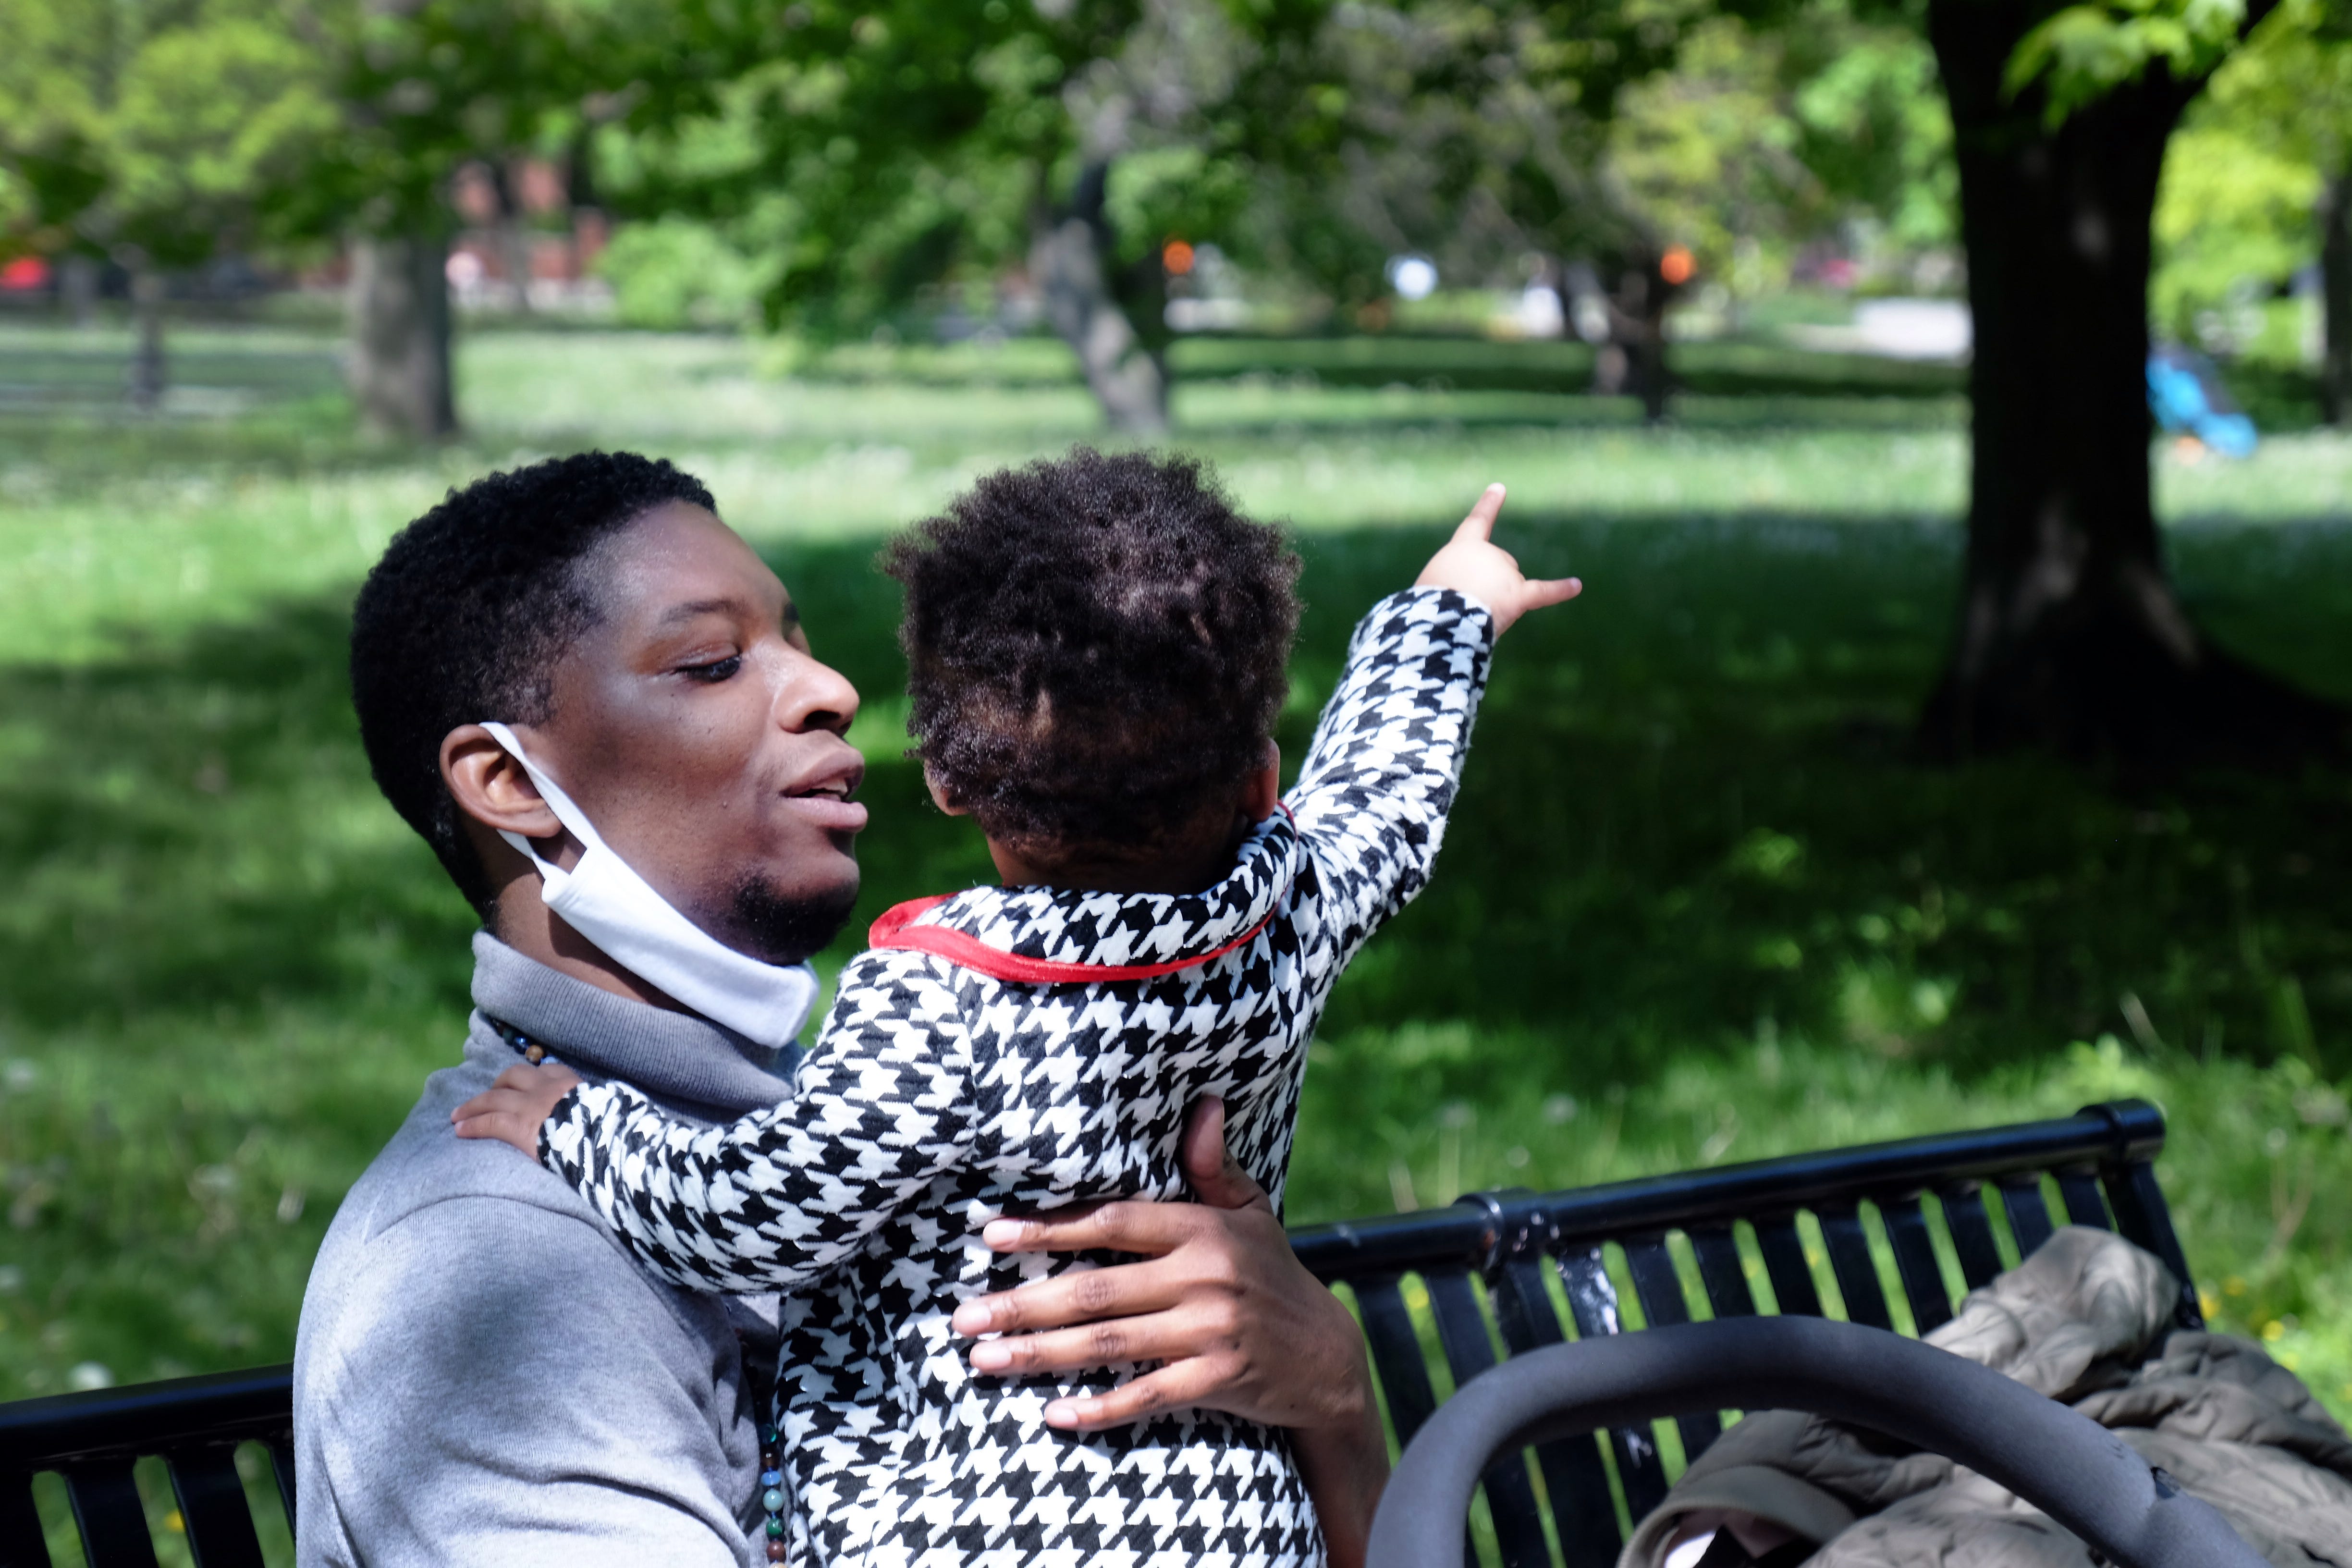 Myles Brady-Davis and their daughter, Zayn, sit by the Model Yacht Basin in Harold Washington Park in Hyde Park, Chicago on May 14, 2021.